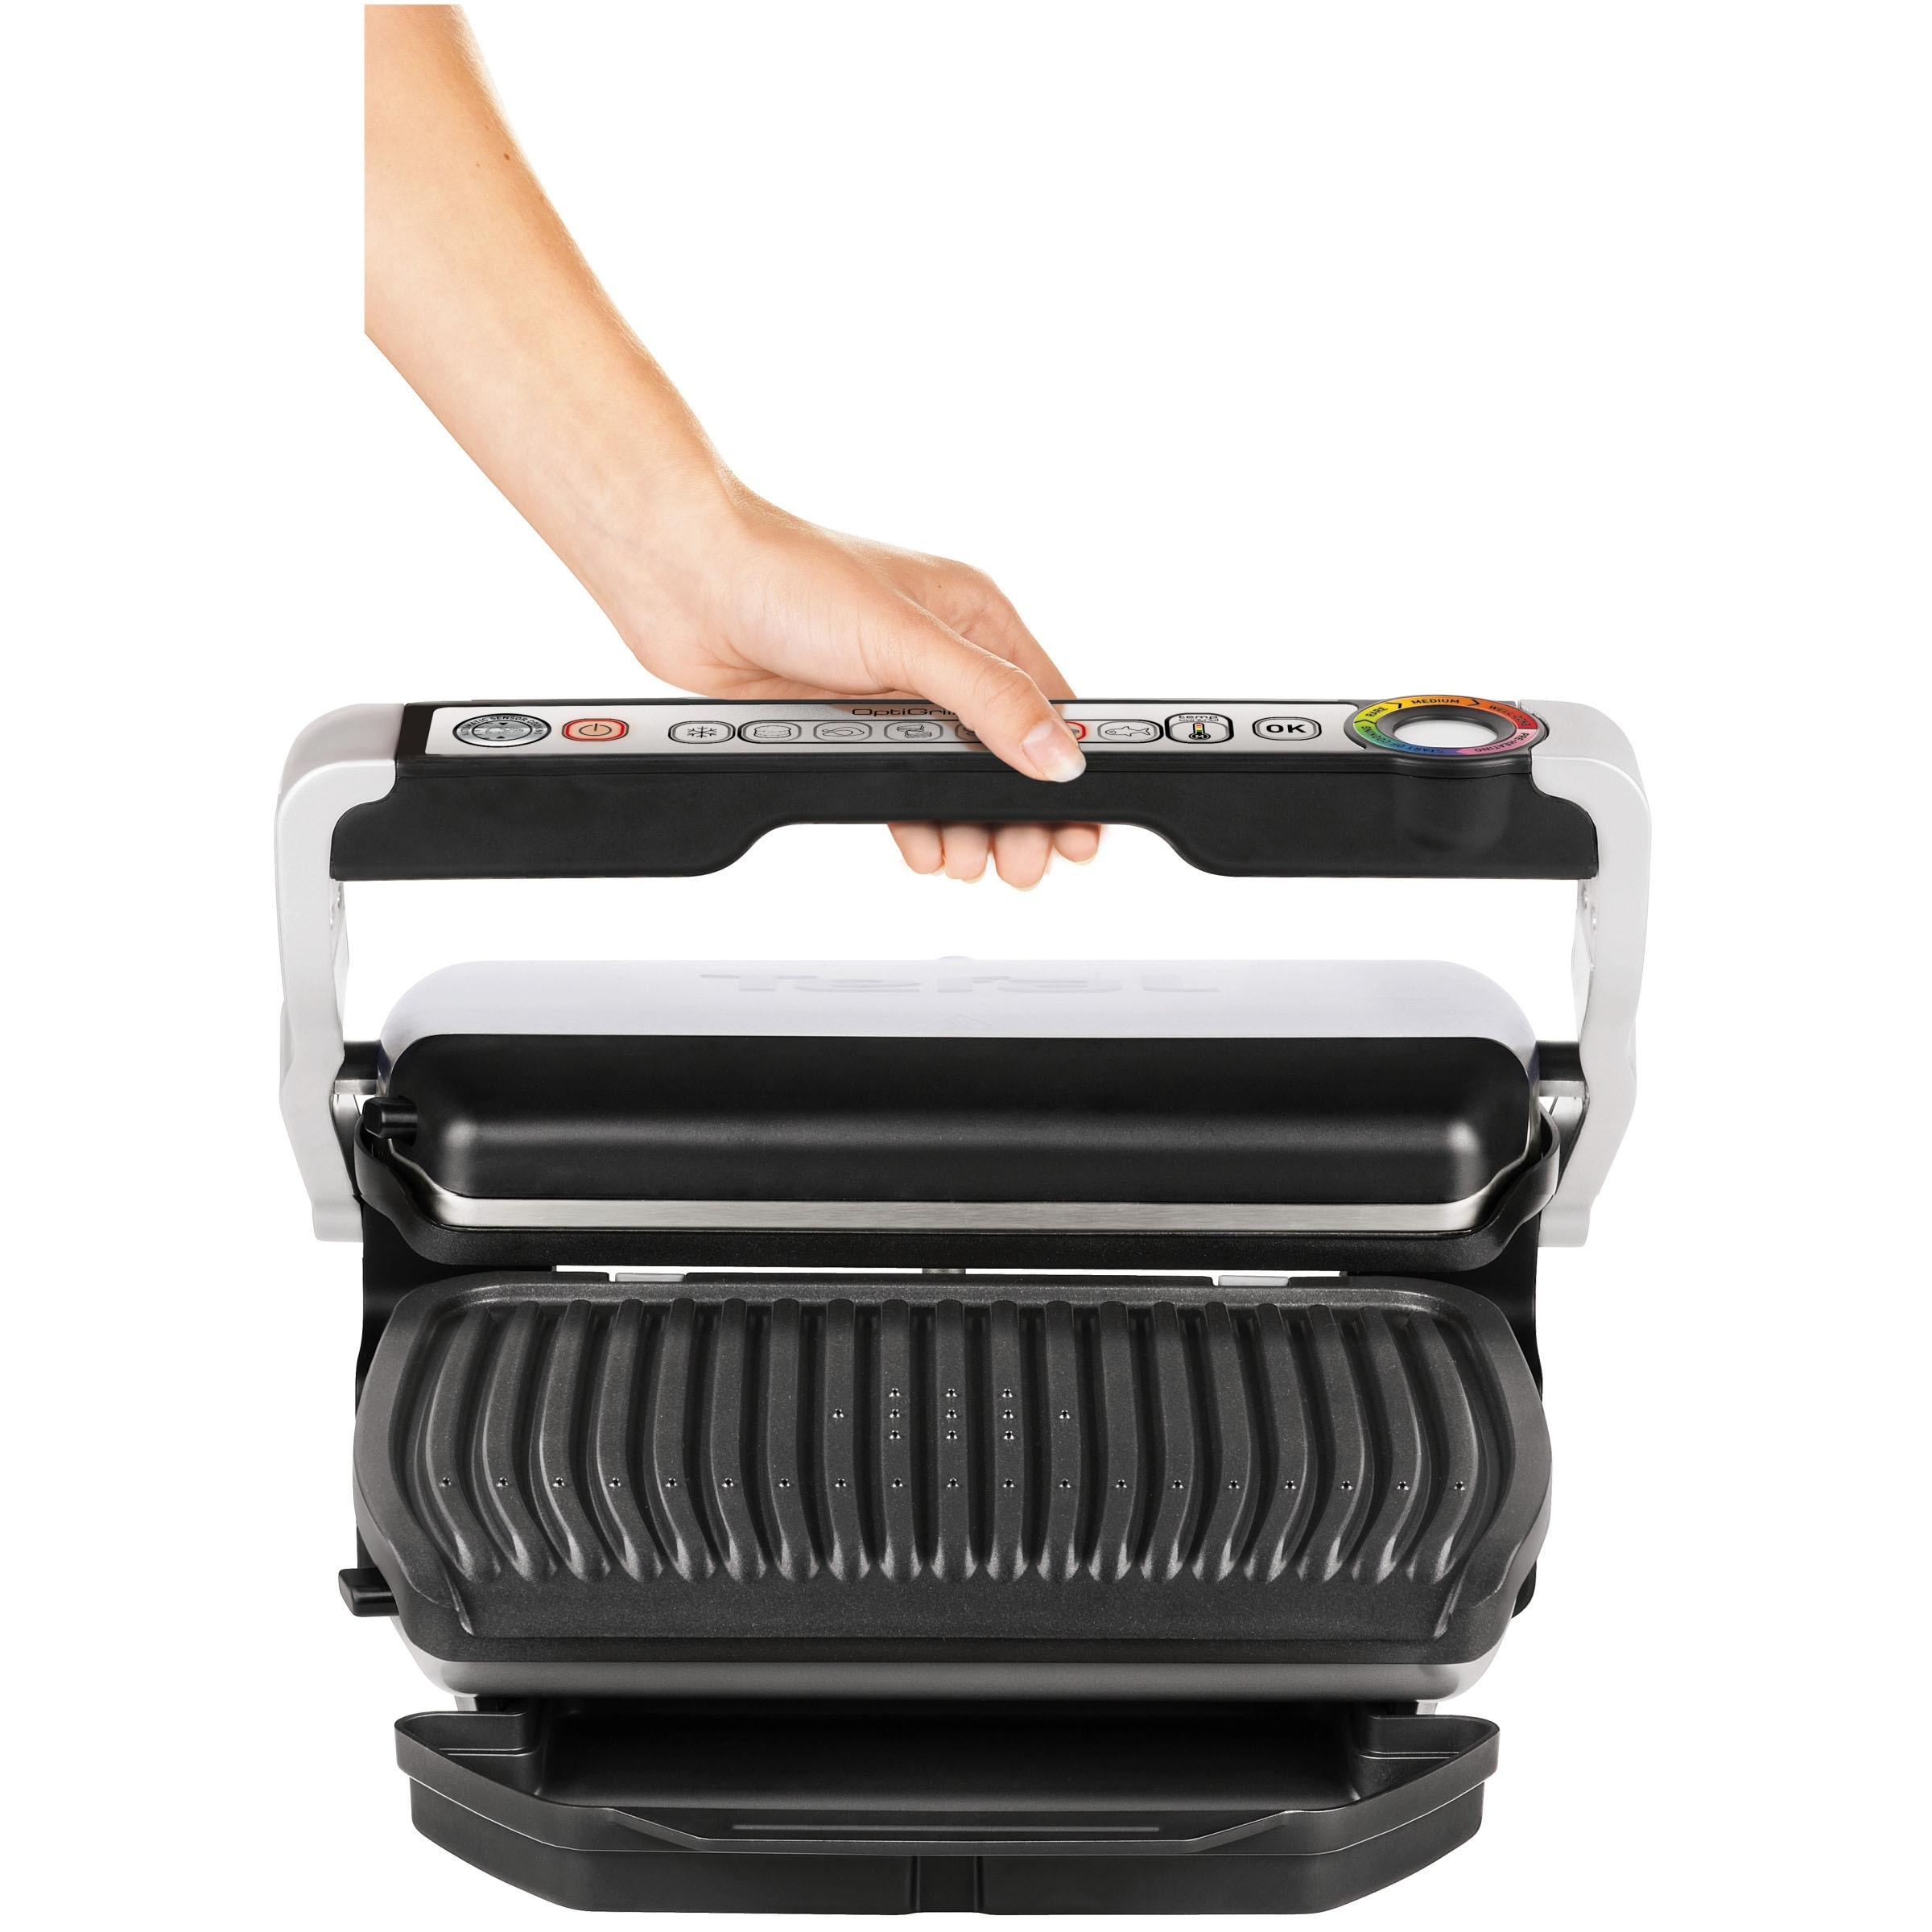 T Fal GC704553 1800W OptiGrill Large Indoor Electric Grill Open Box